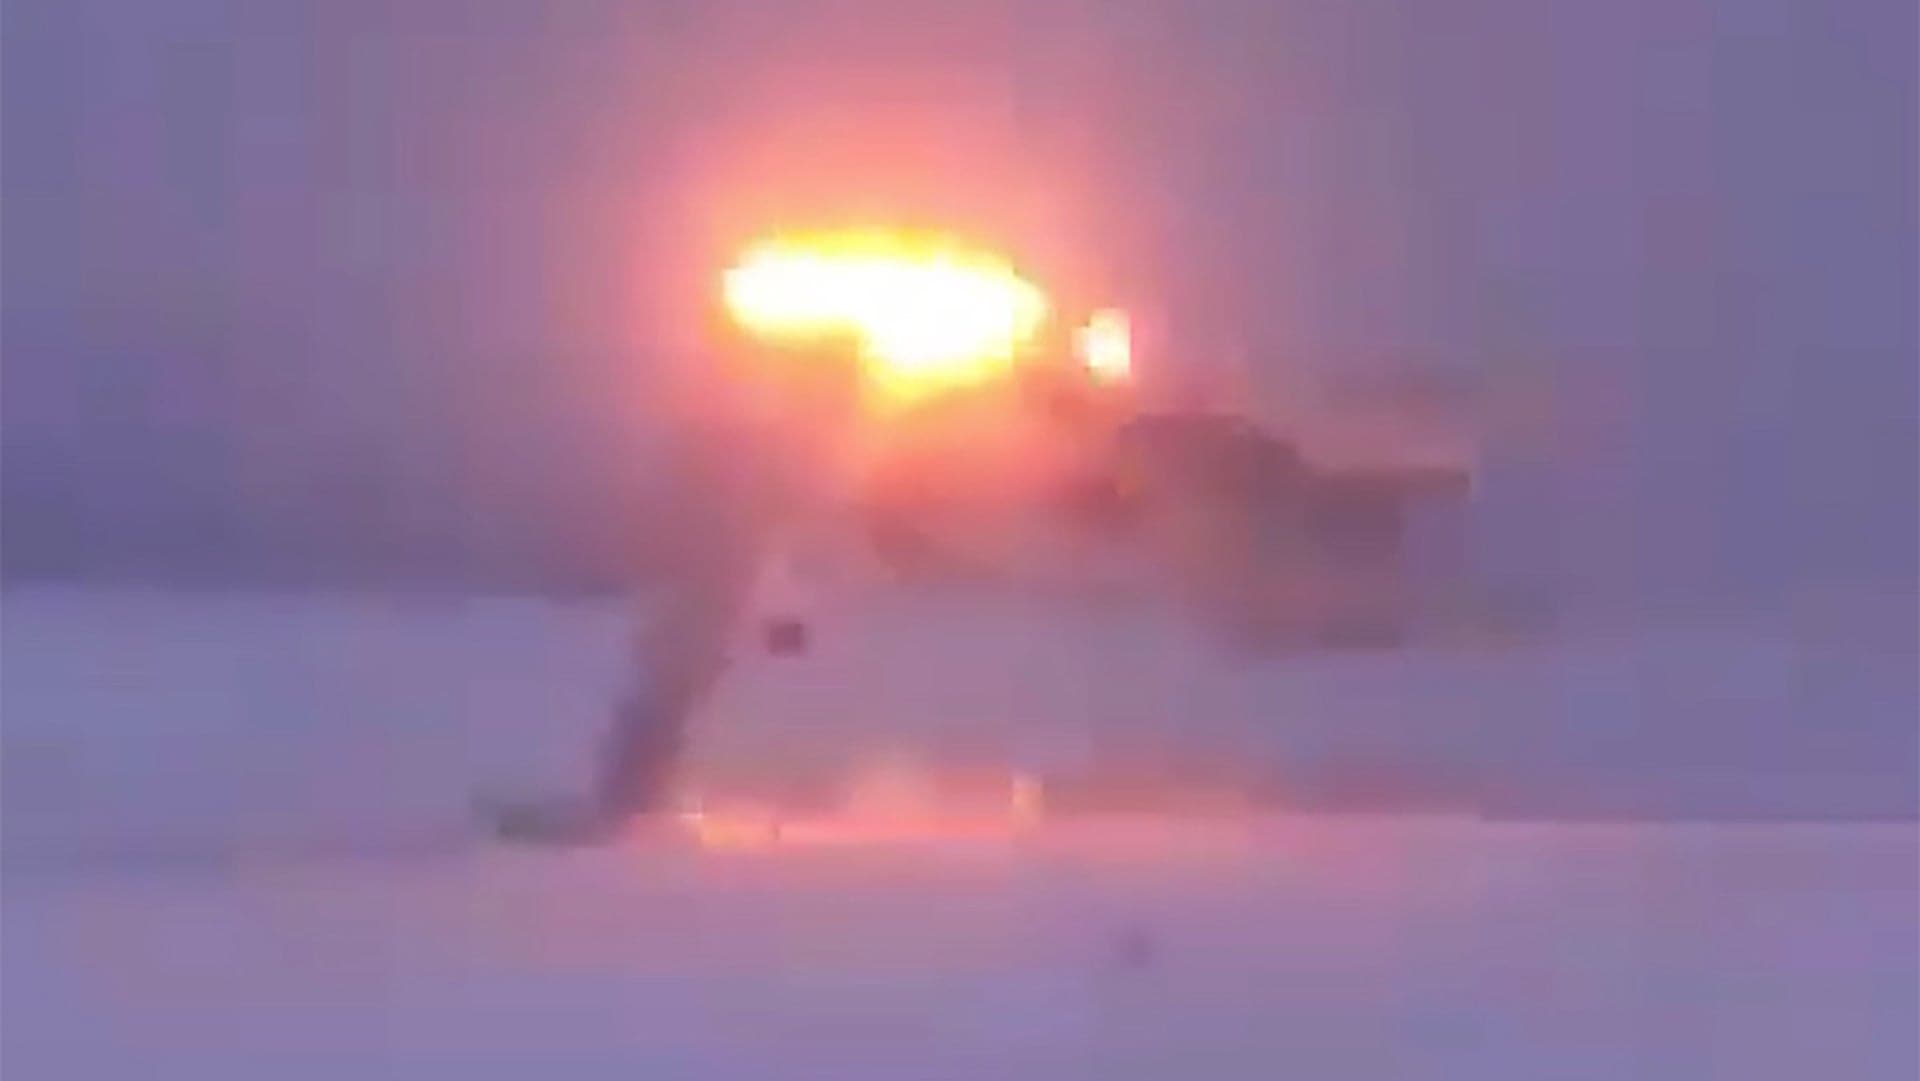 Dramatic Video Of Russian Tu-22M3 Crash Landing In Bad Weather Emerges (Updated)